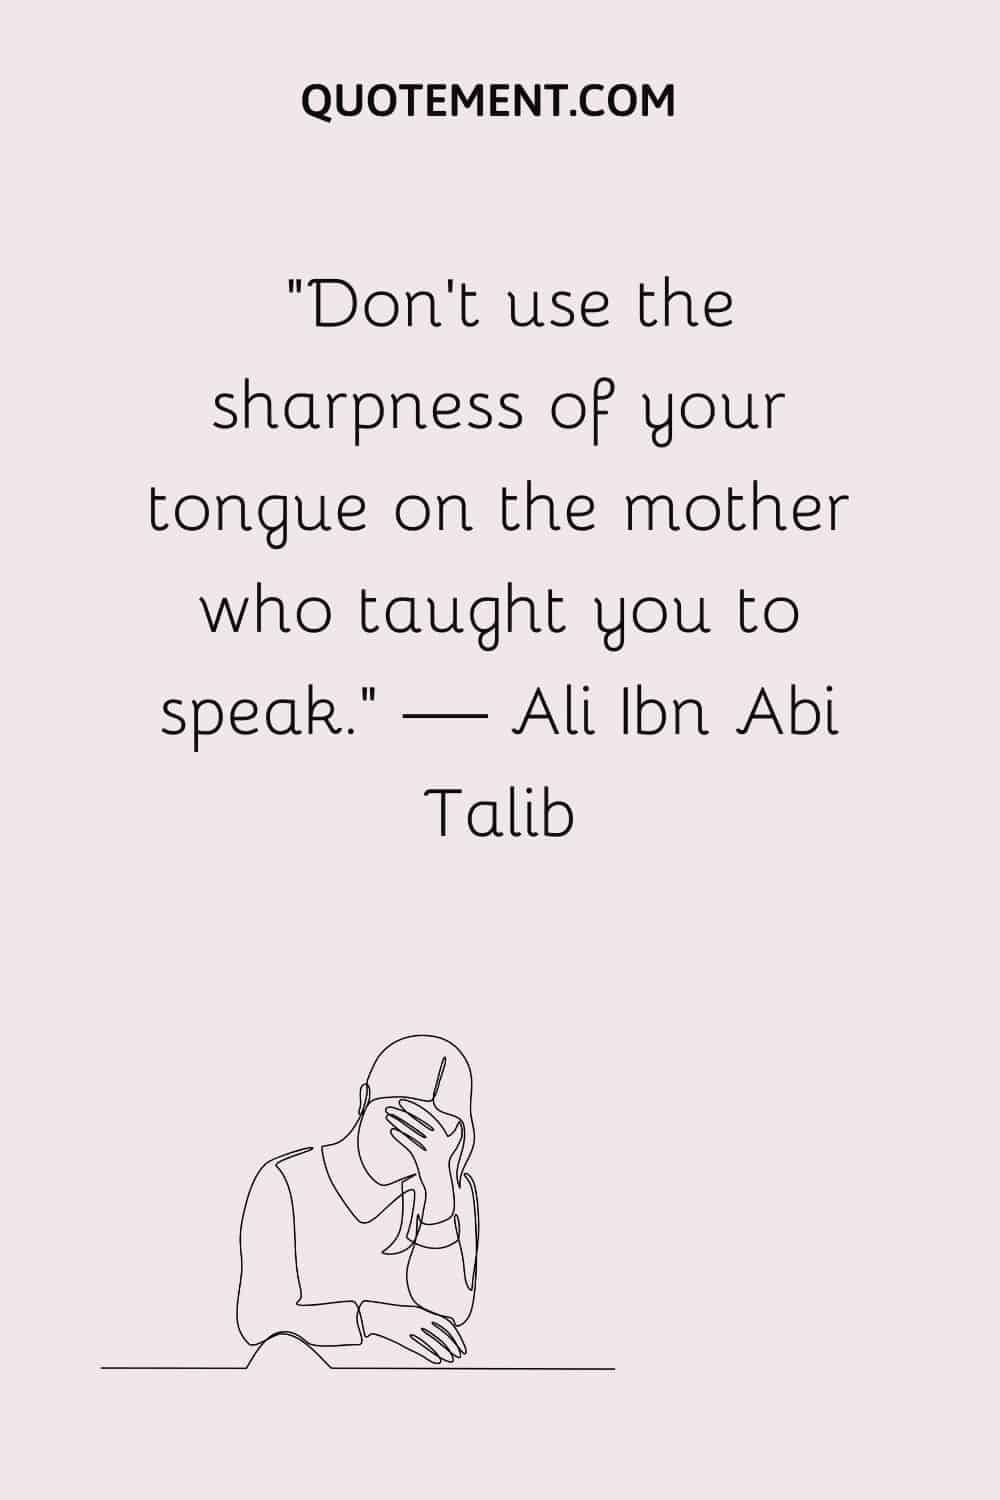 Don’t use the sharpness of your tongue on the mother who taught you to speak